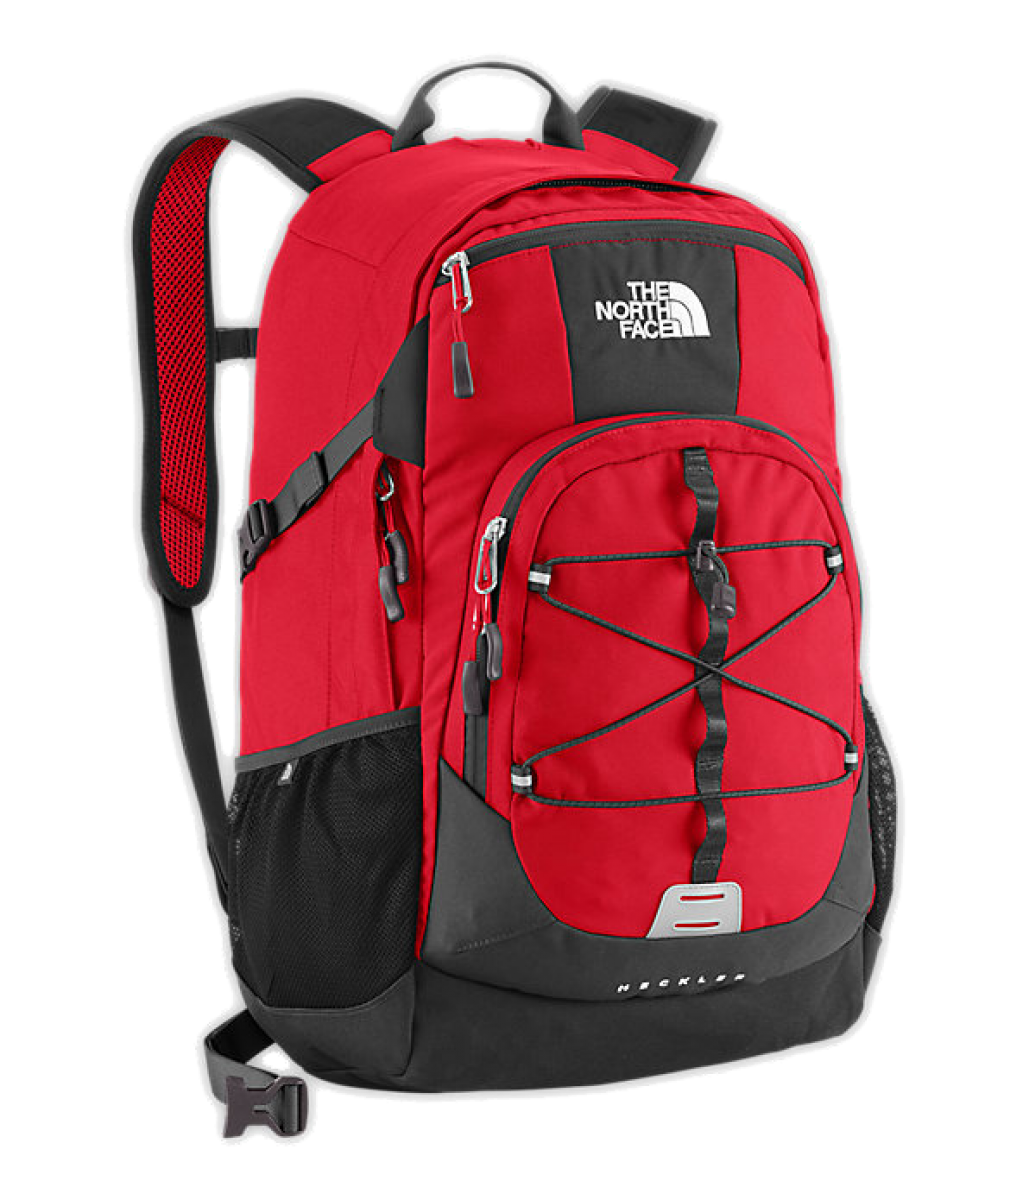 The North Face Hero Bag